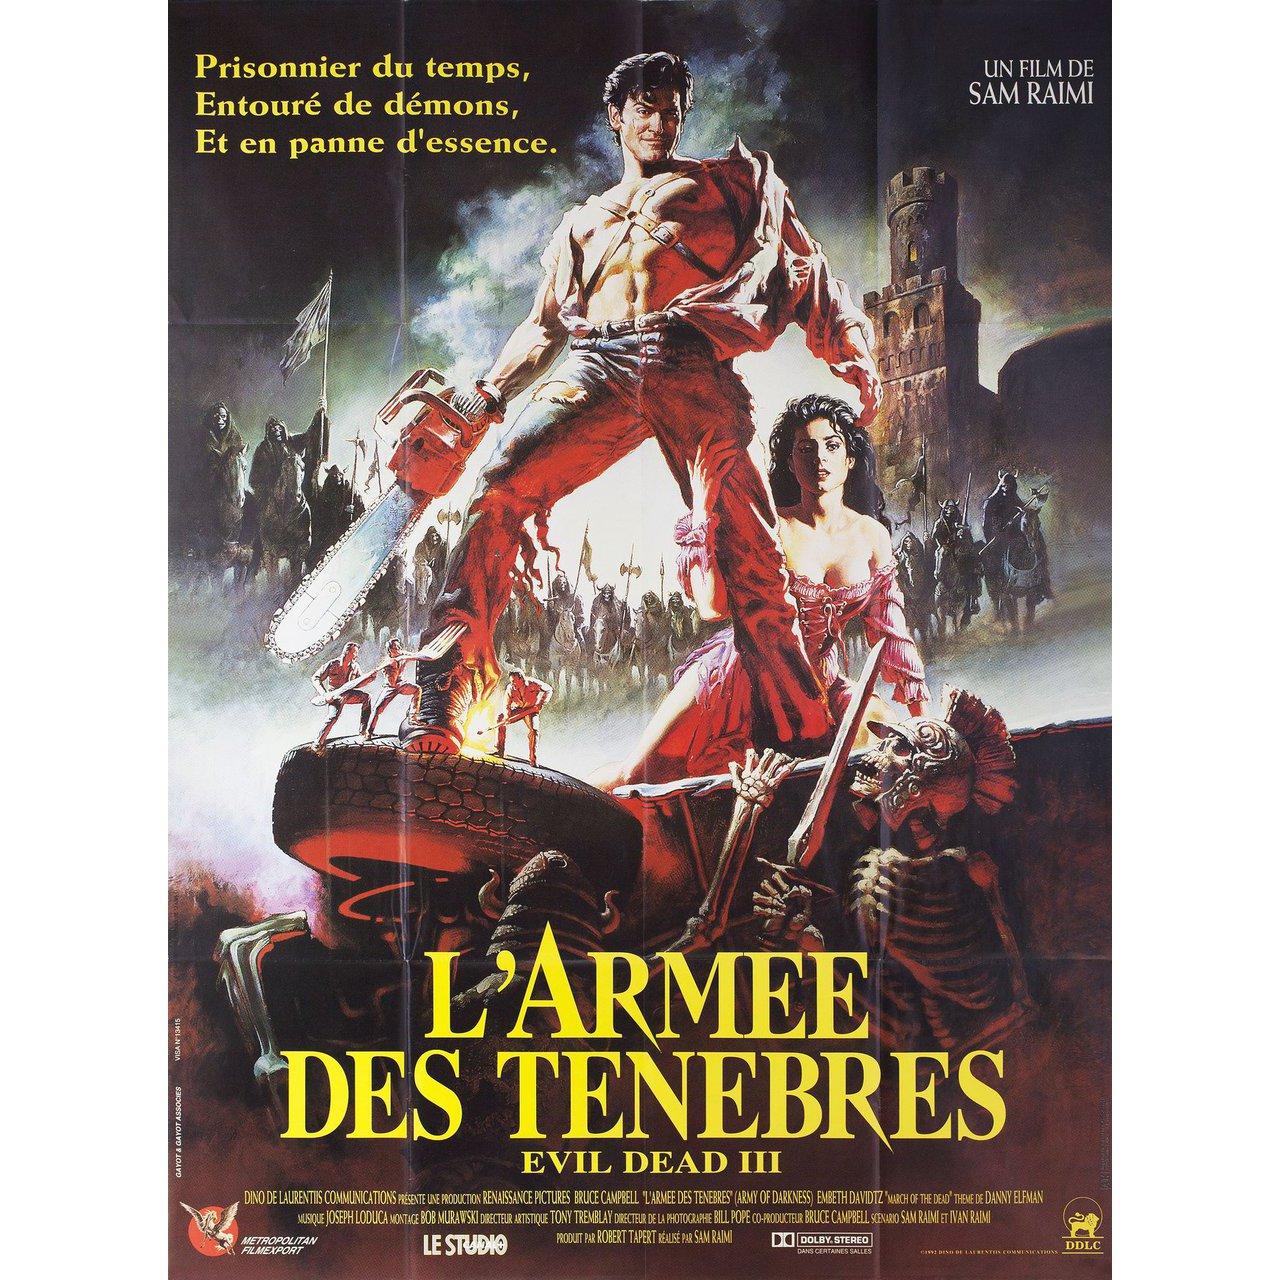 Original 1993 French grande poster by John Bolton for the first French theatrical release of the film Army of Darkness directed by Sam Raimi with Bruce Campbell / Embeth Davidtz / Marcus Gilbert / Ian Abercrombie. Very Good-Fine condition, folded.